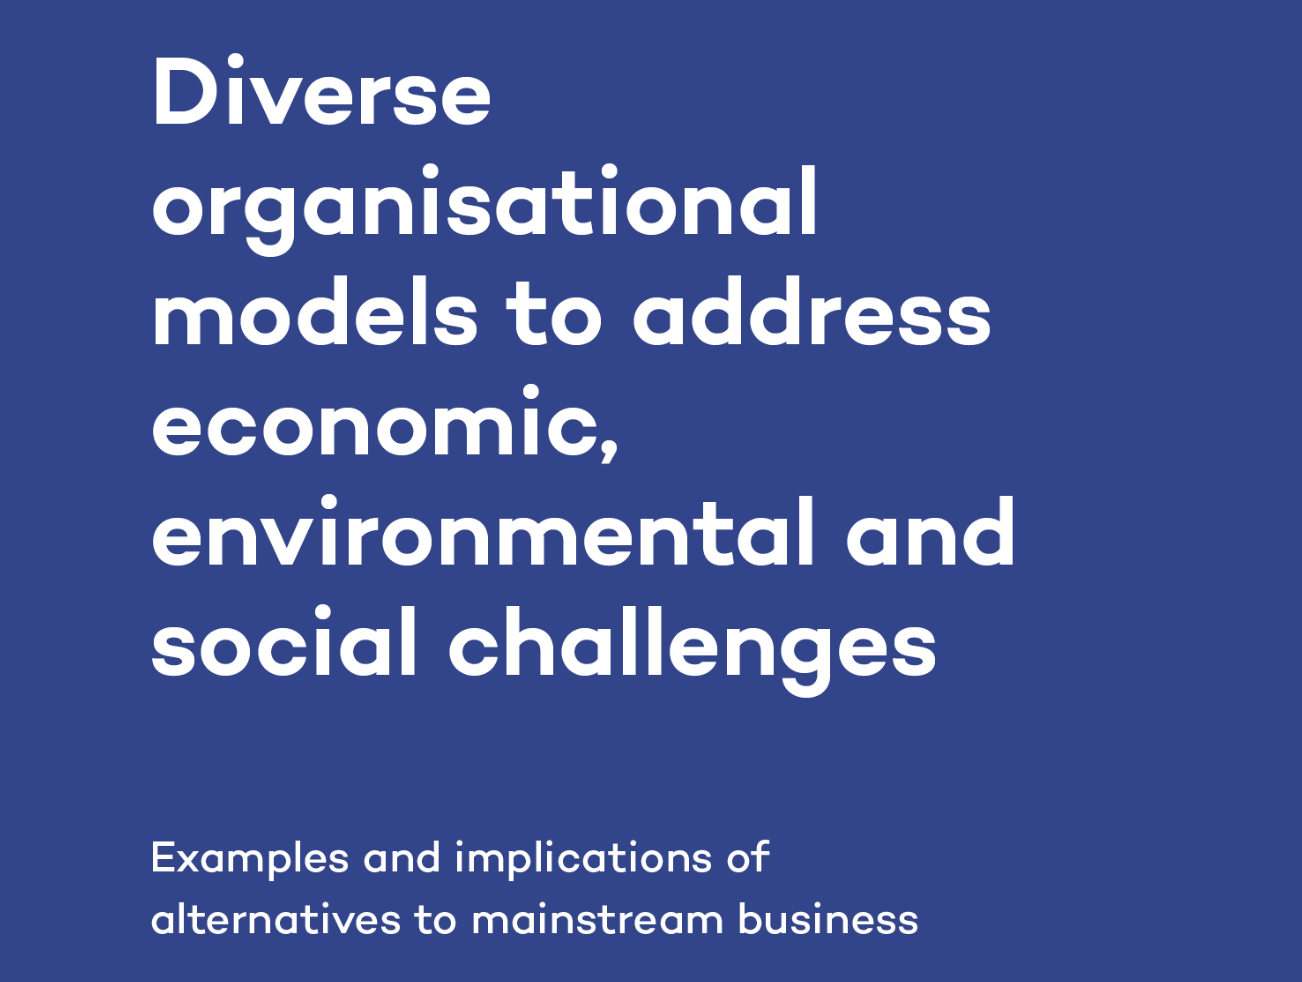 Front cover of the Diverse organisational models to address economic, environmental and social challenges report